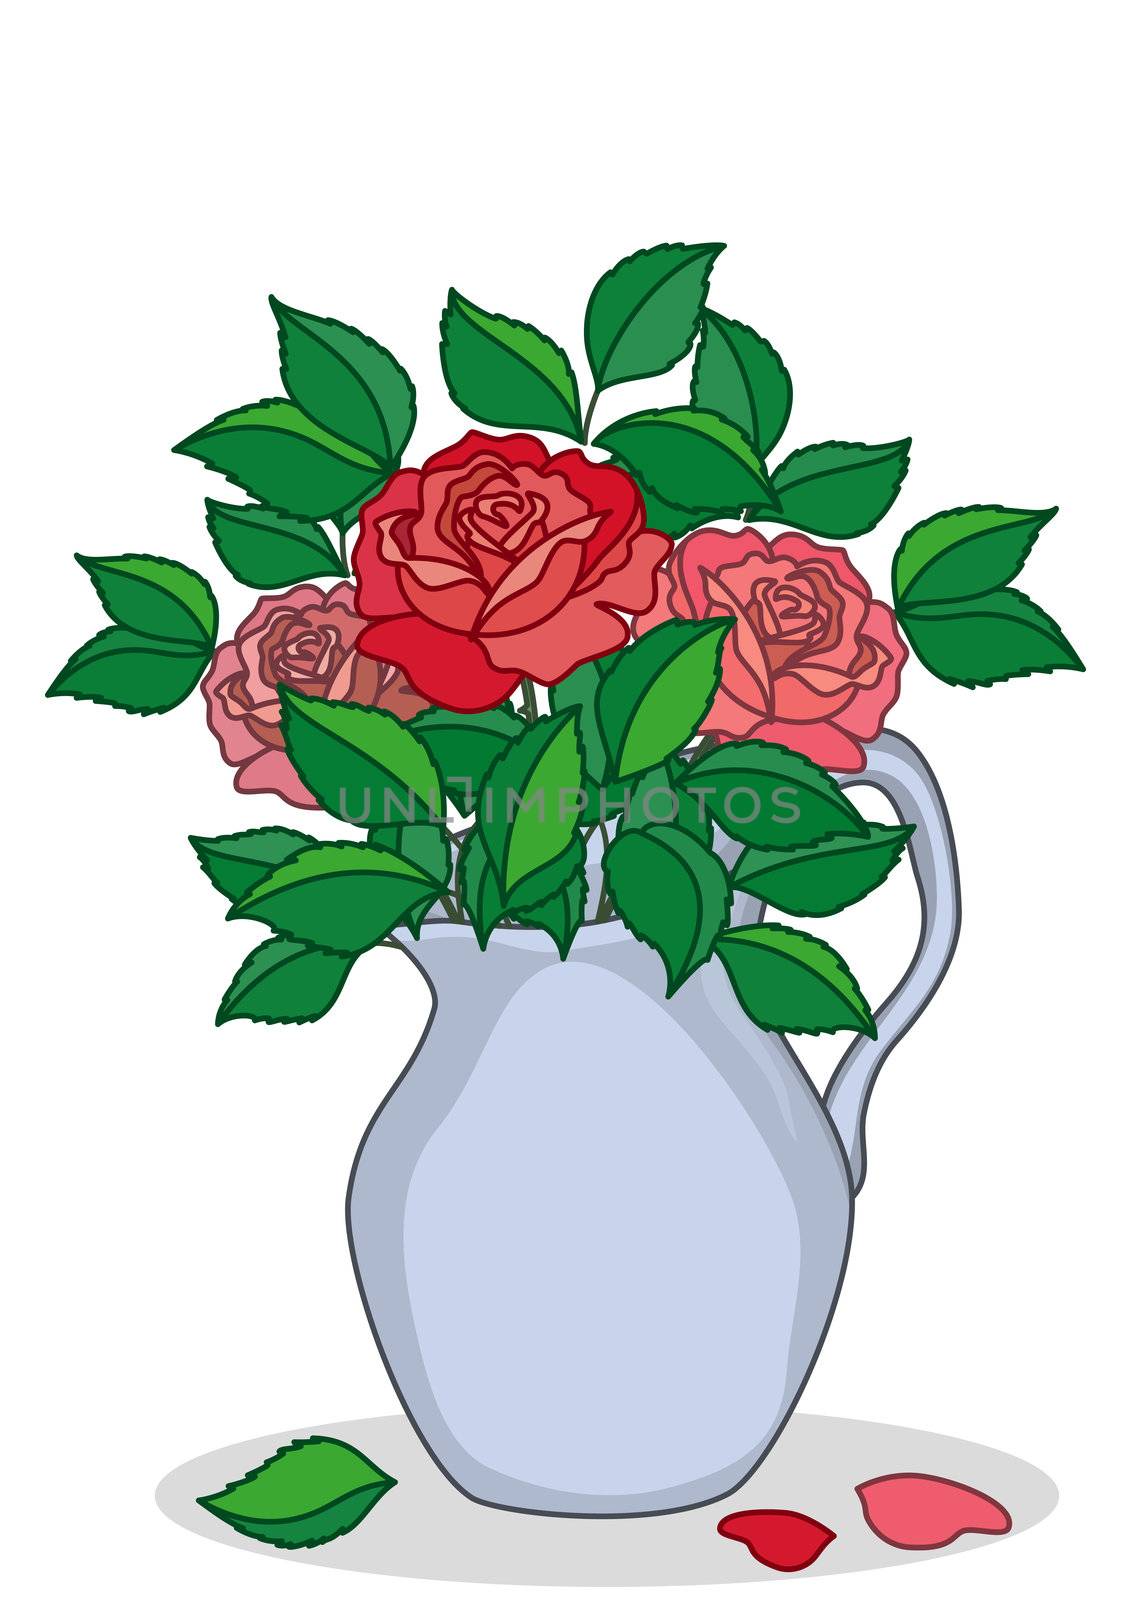 Jug of blue porcelain with three red and pink roses